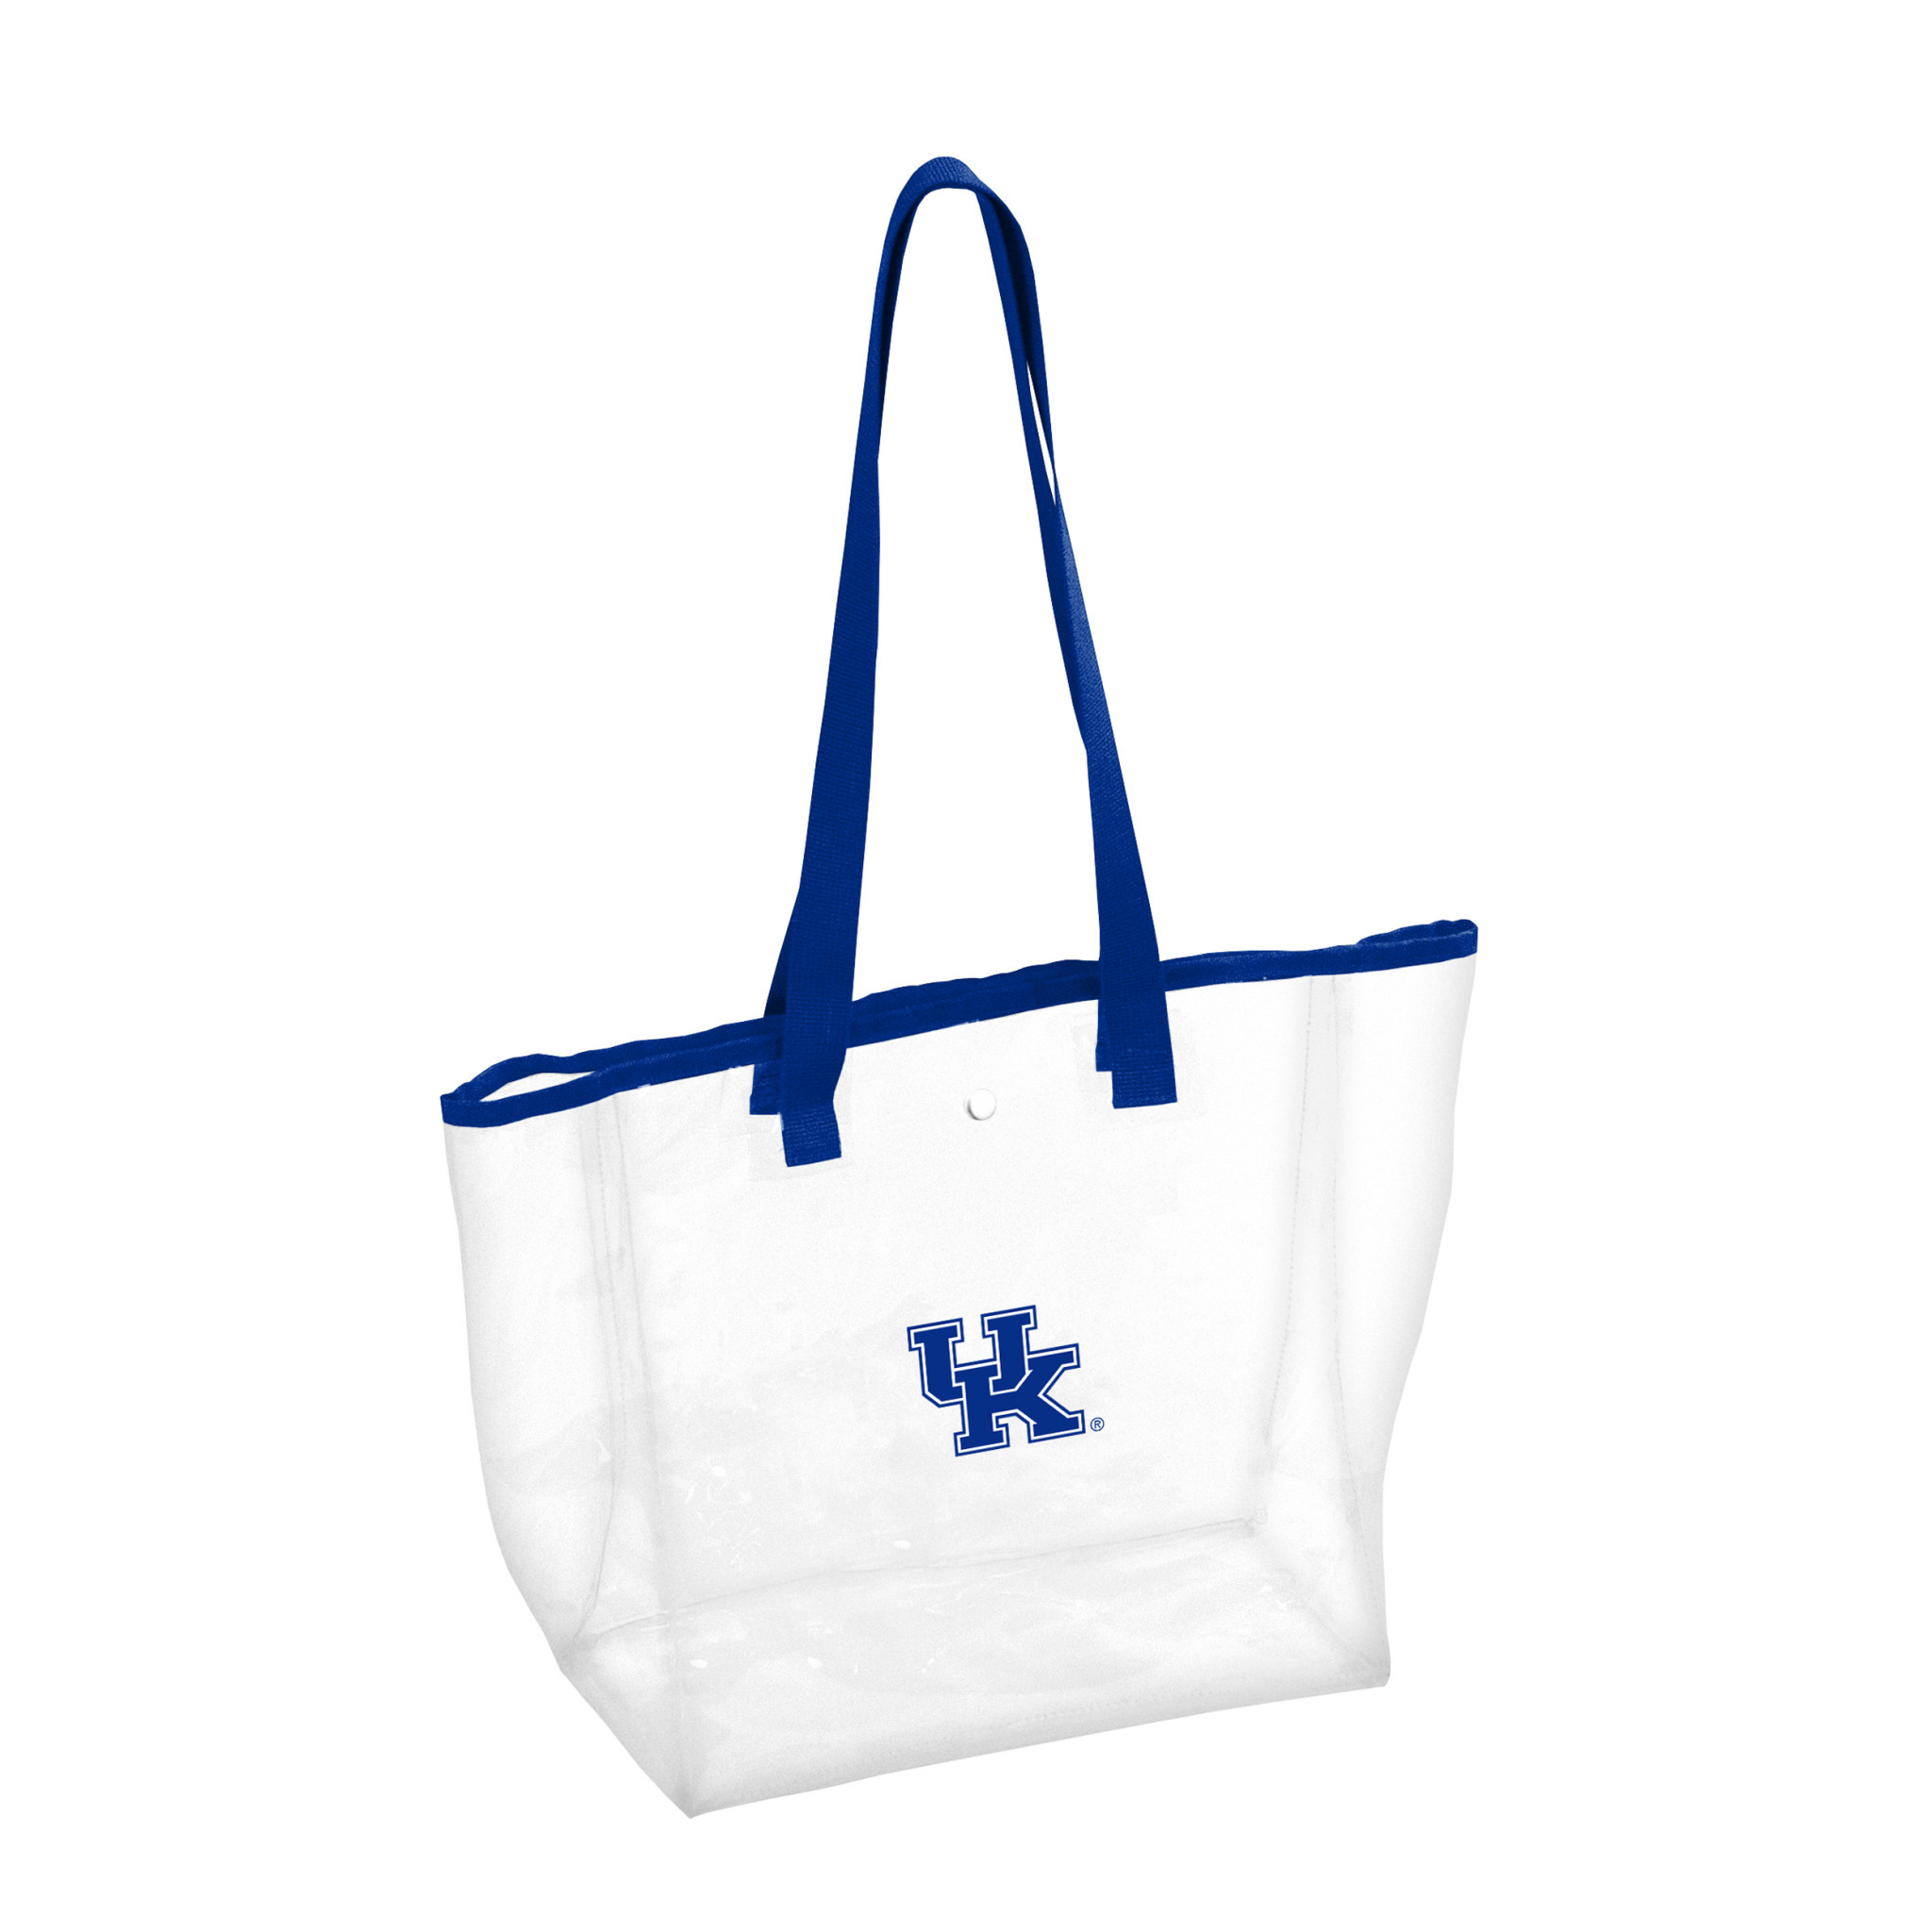 TOTE BAG,CLEAR,UK Clear JD Becker's UK & Superstore